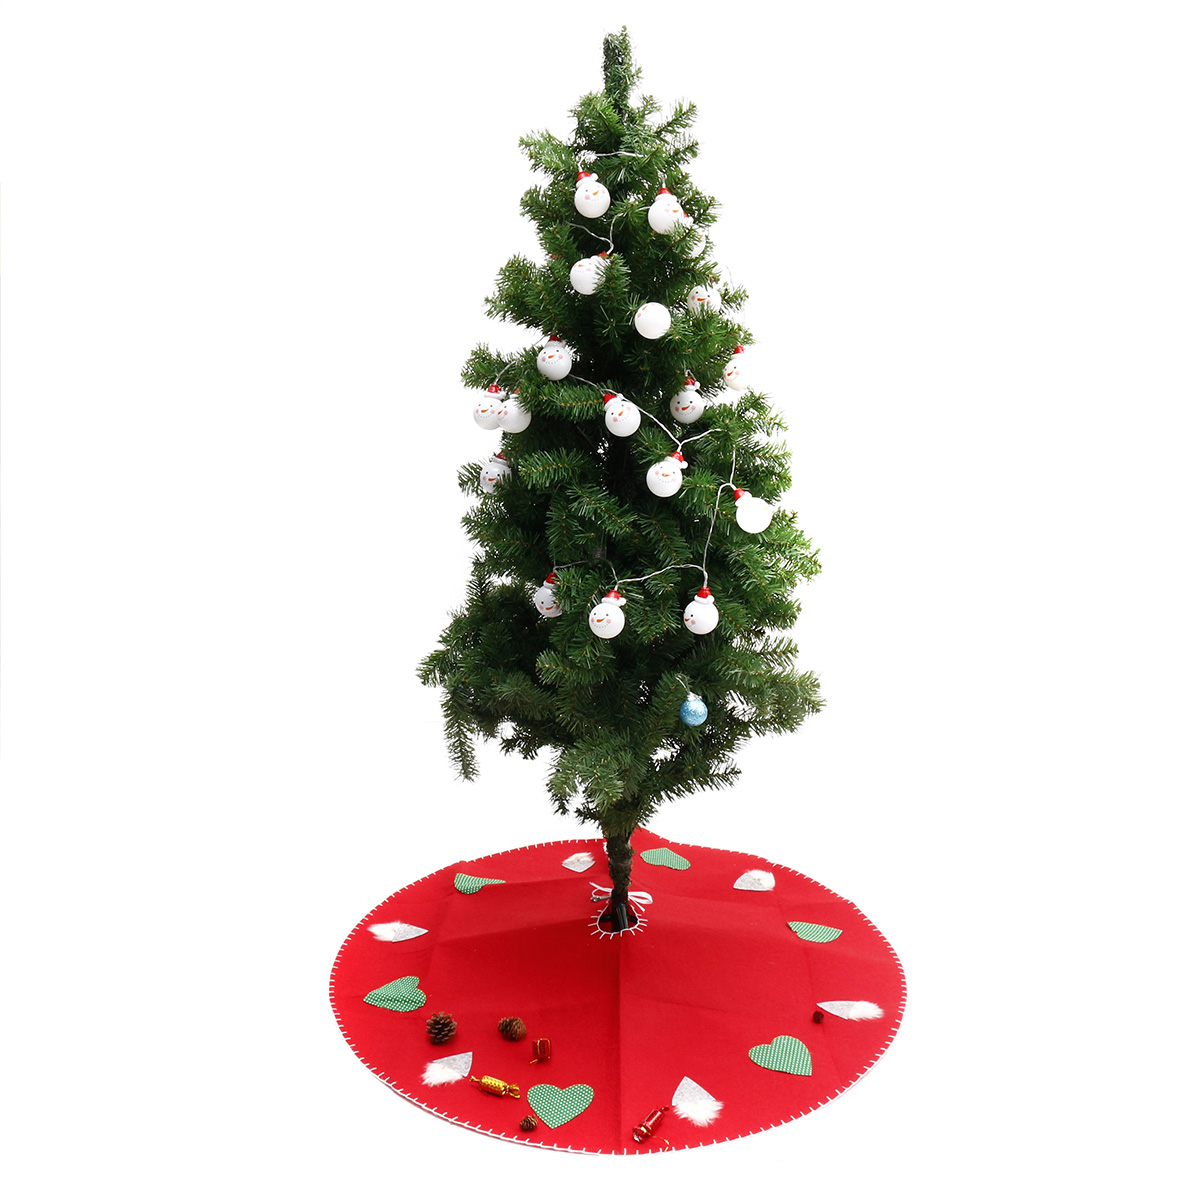 100cm-Red-Christmas-Tree-Skirt-Carpet-Party-Gift-Decor-Pad-Ornaments-Round-Mat-1376090-3